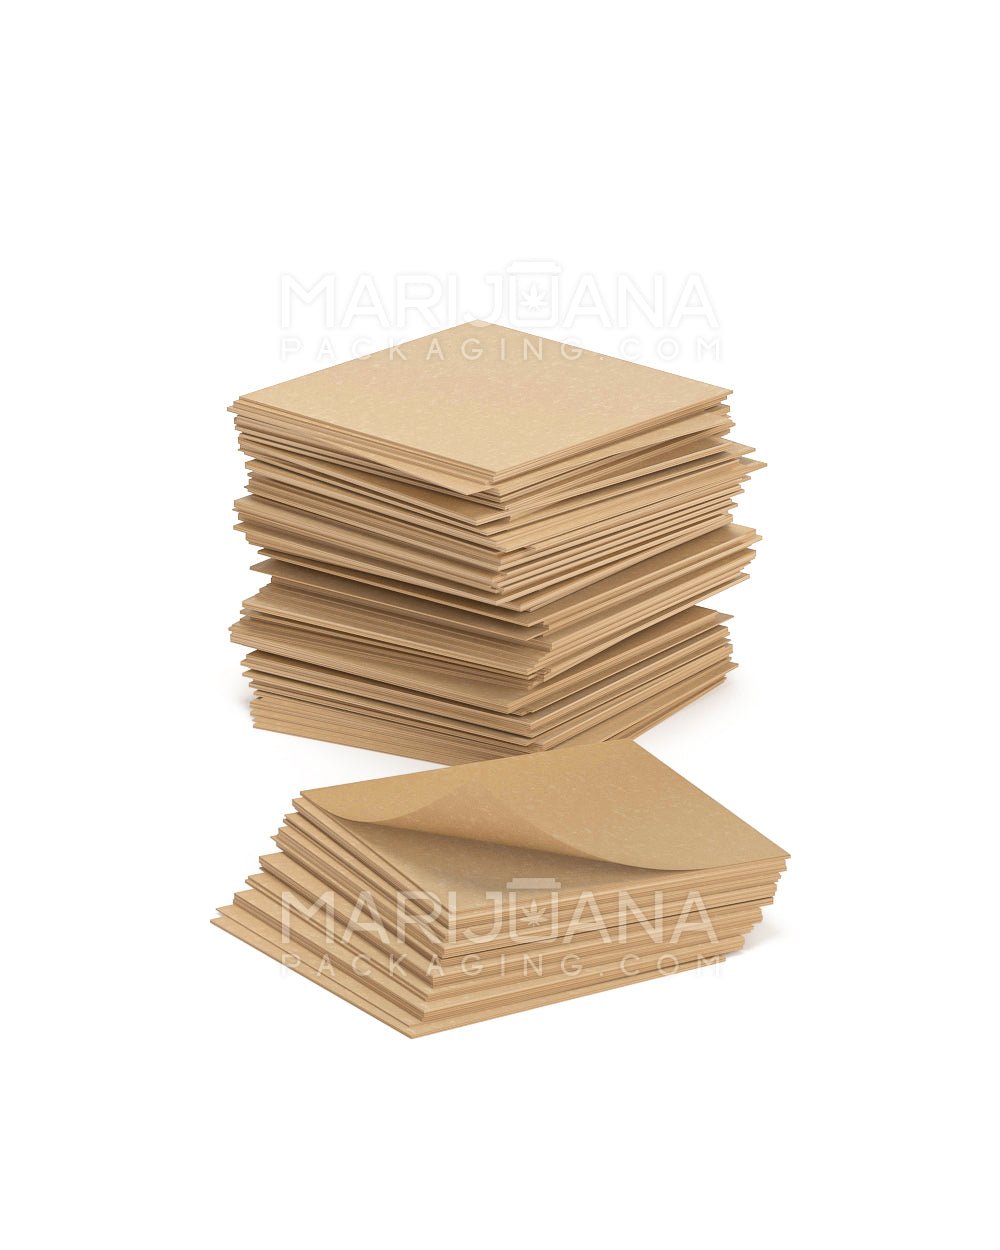 Non Silicone Coated Parchment Paper | 4in x 4in - Natural Brown - 1000 Count - 4